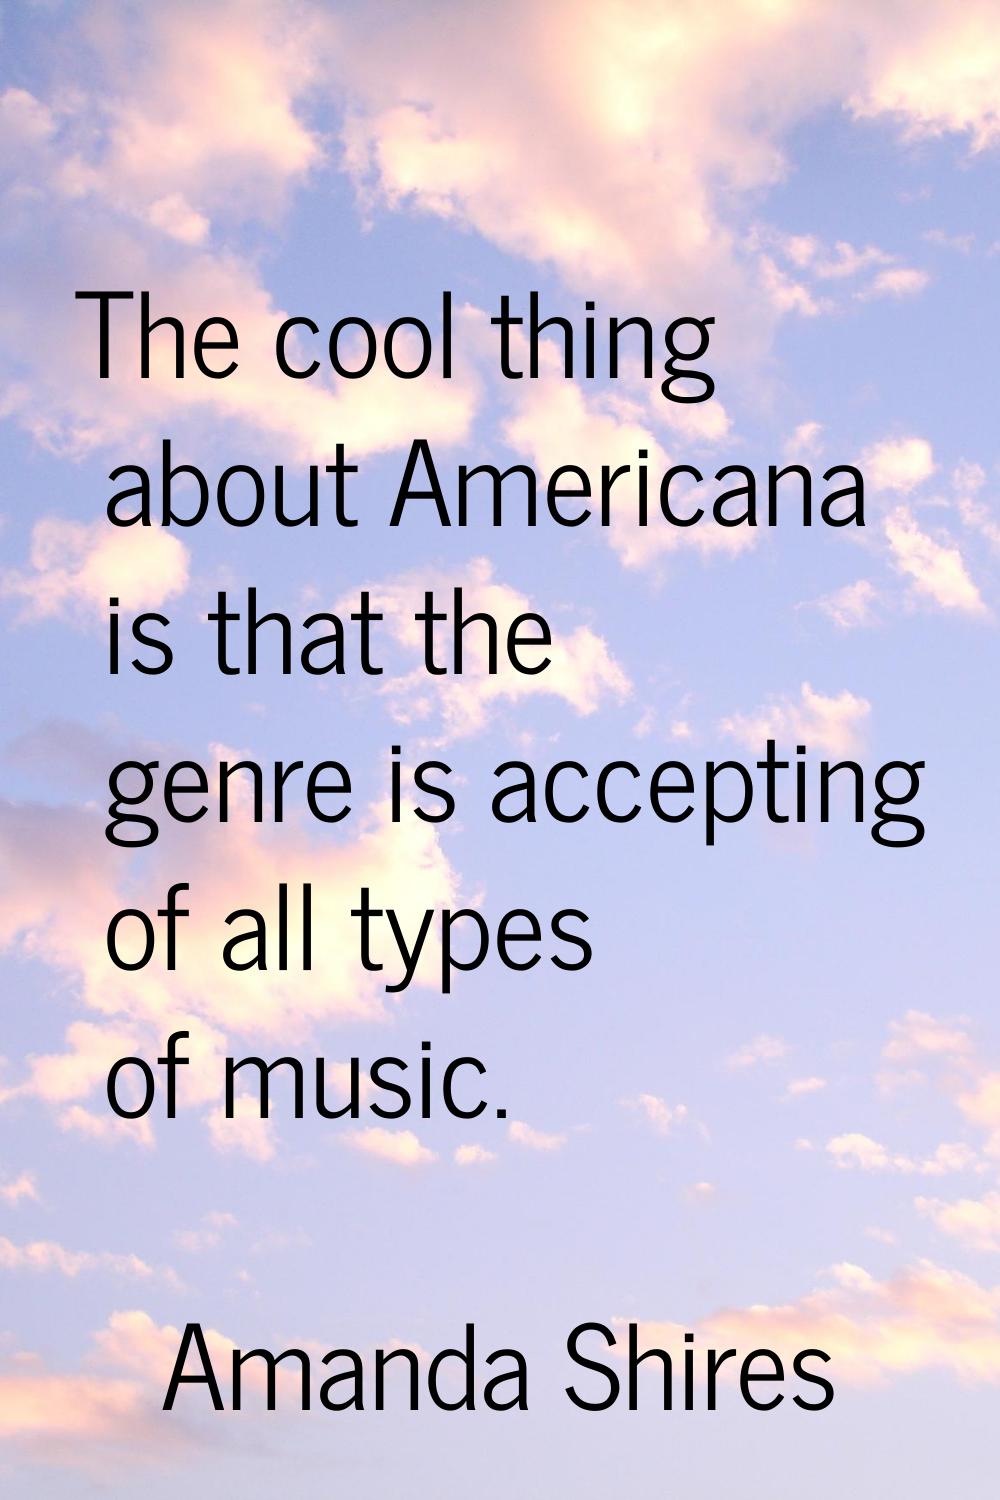 The cool thing about Americana is that the genre is accepting of all types of music.